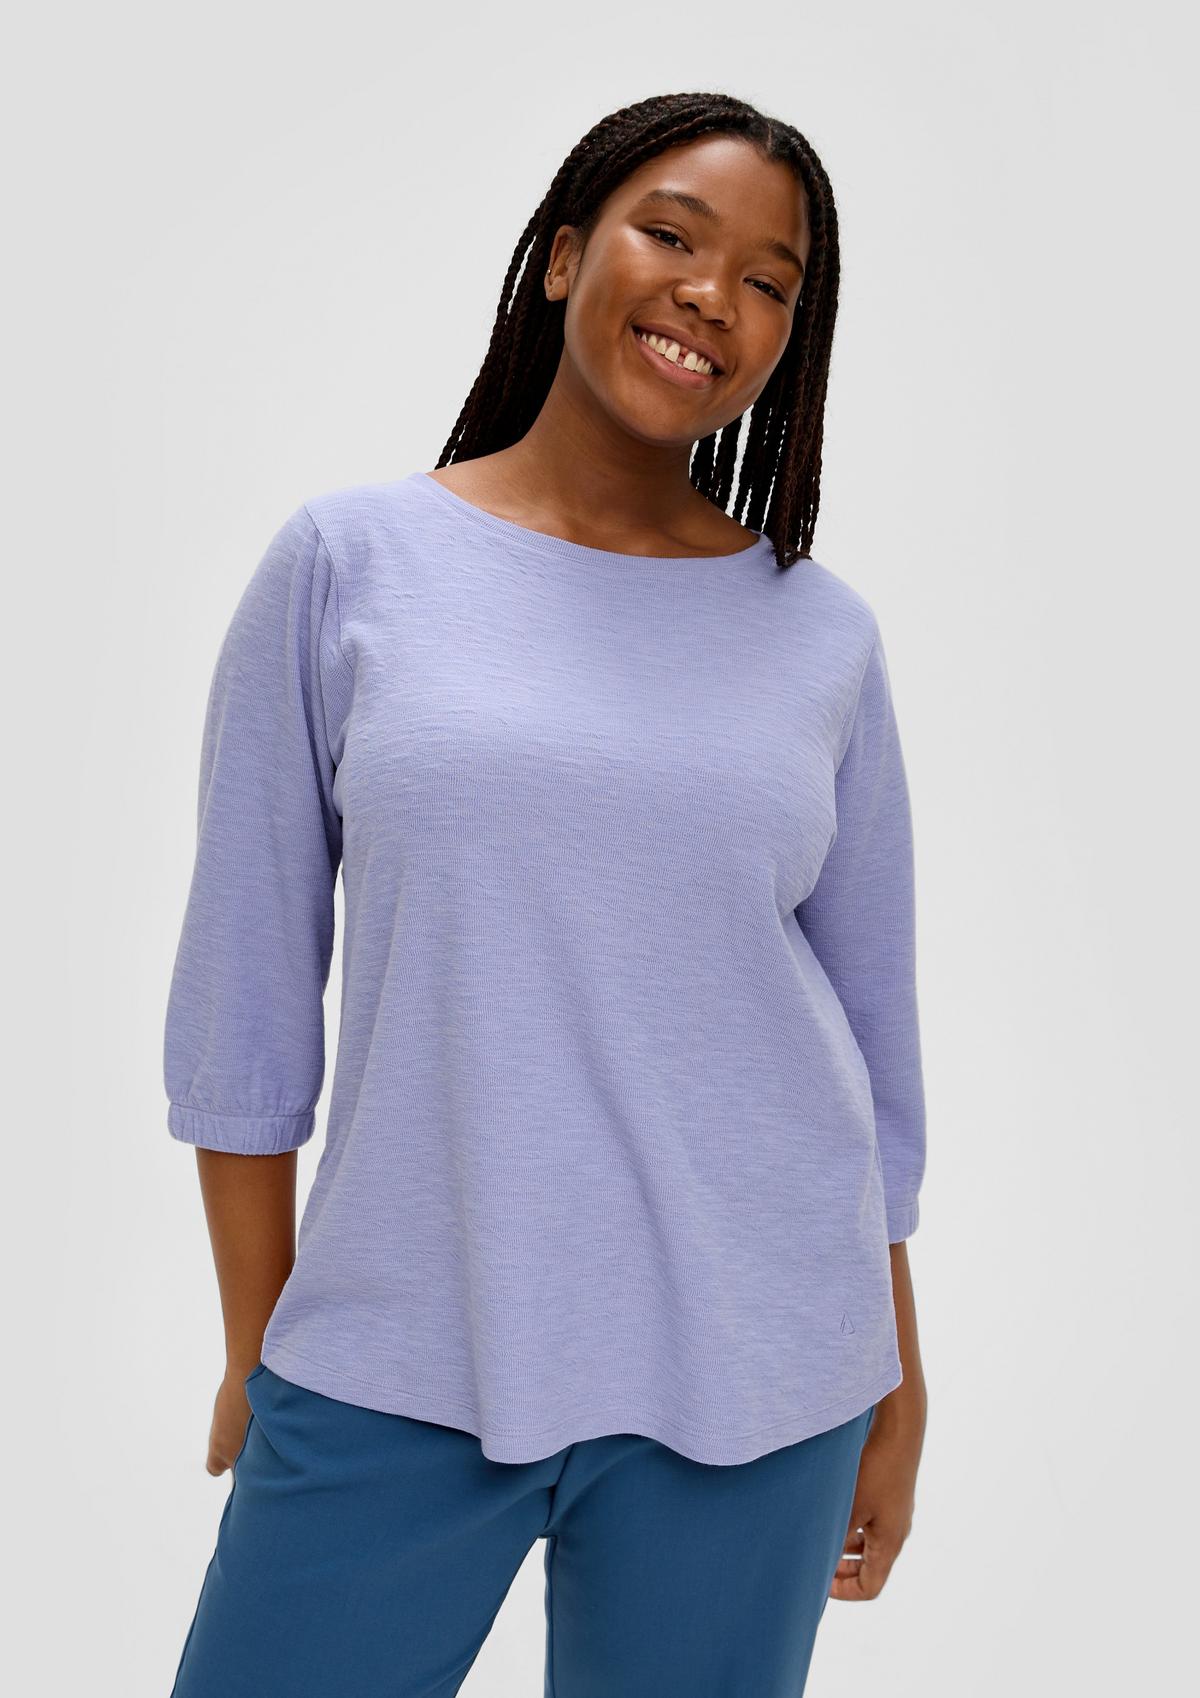 s.Oliver Top with a slub texture